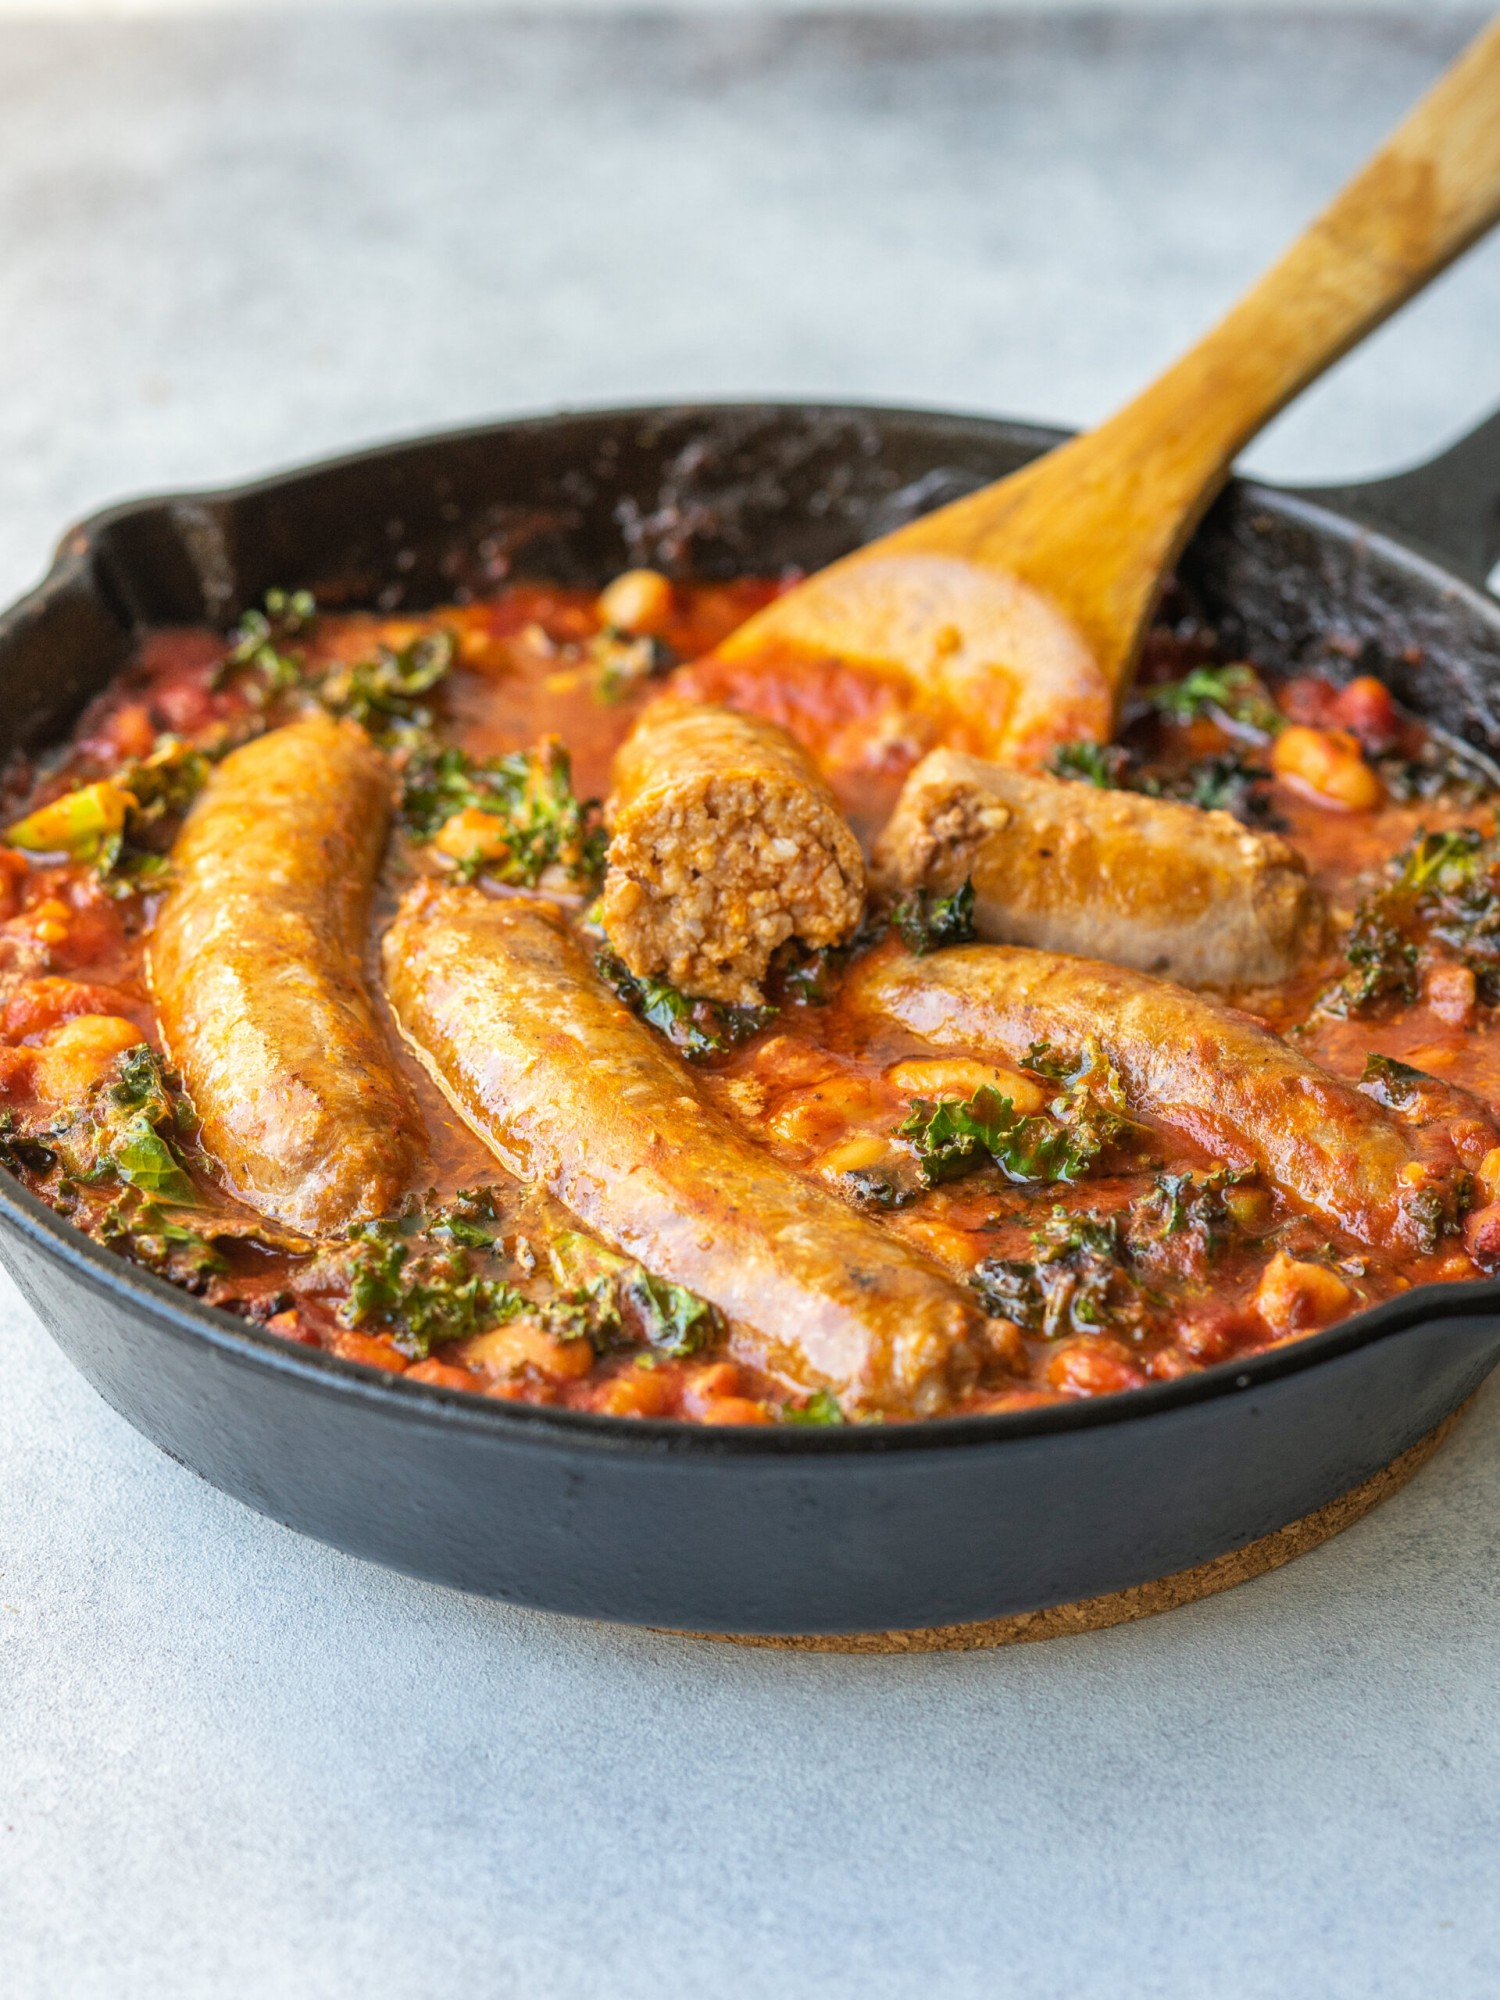 Three quarter view of sausage, kale, white beans, and tomato sauce in a cast iron skillet